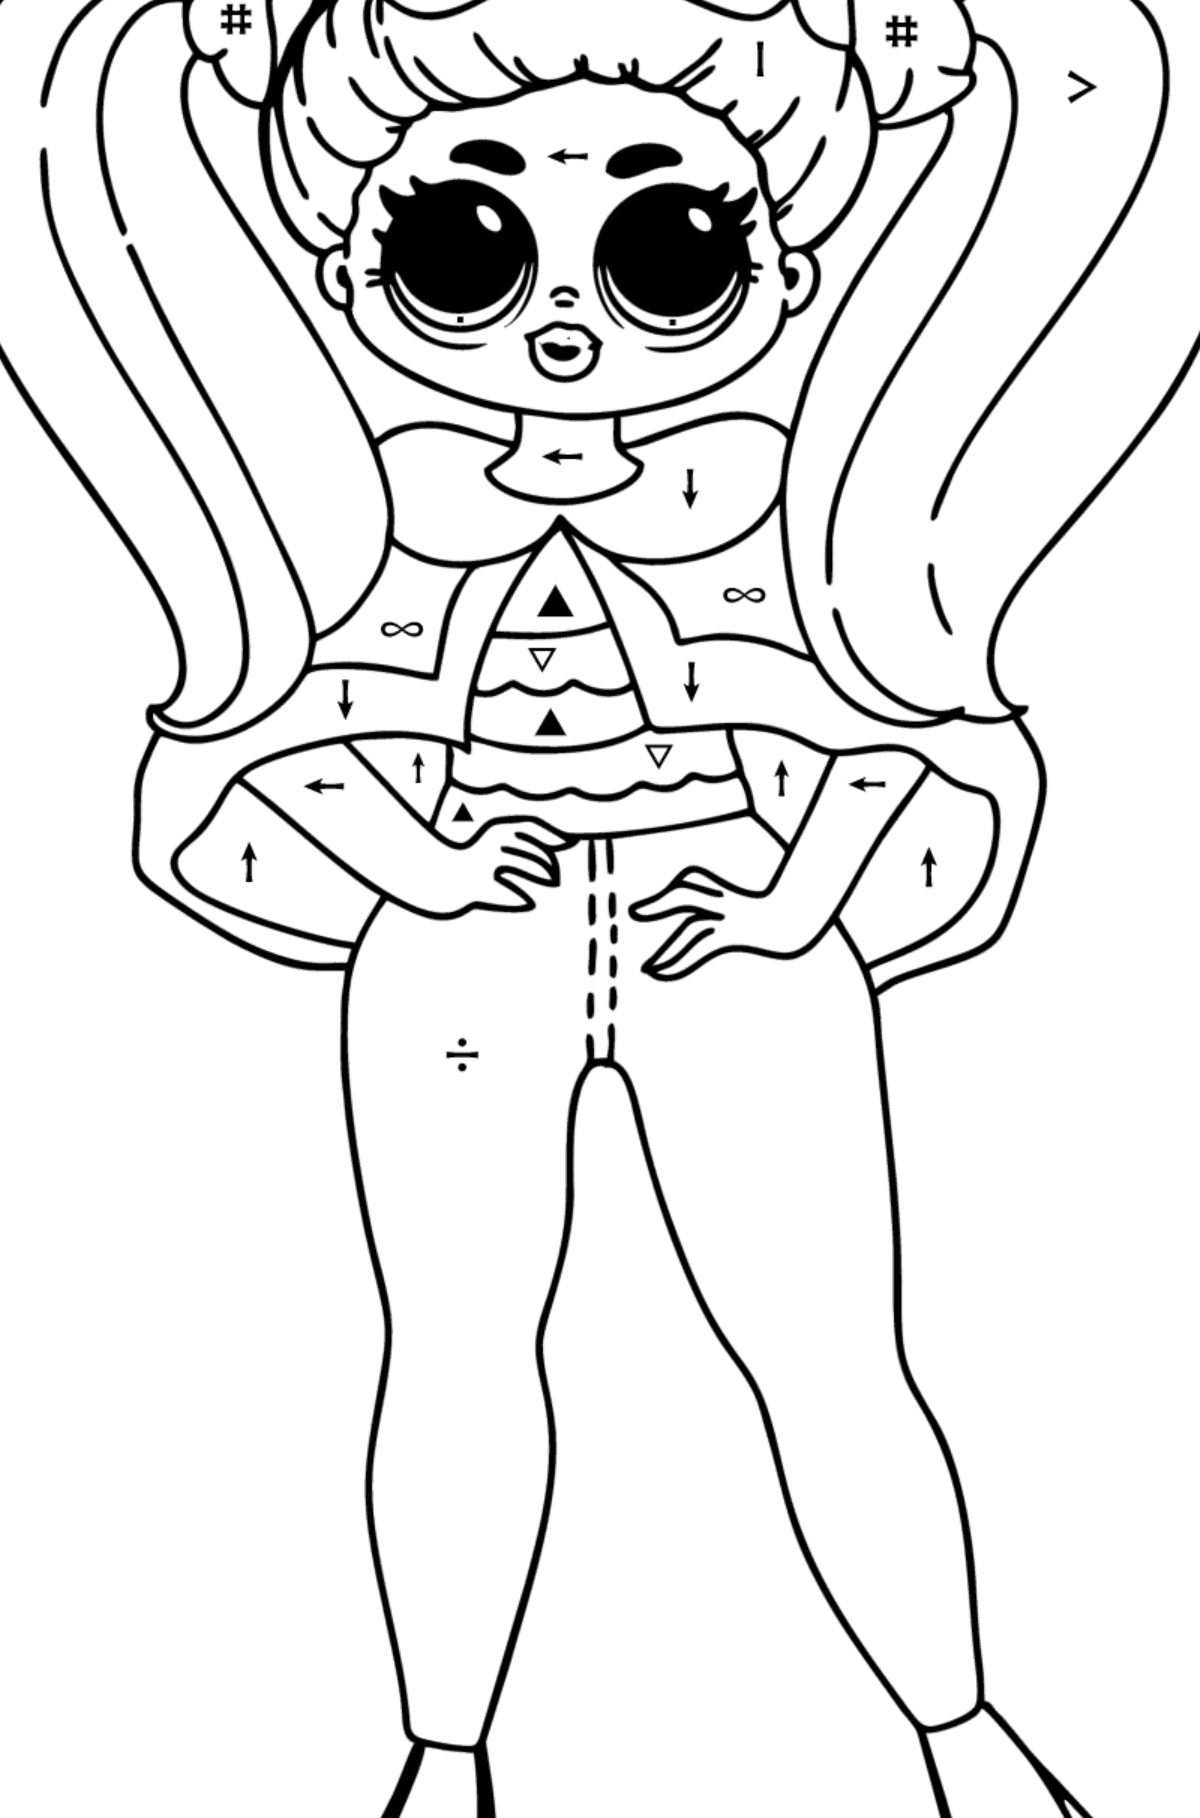 Coloring page LOL Surprise OMG - Coloring by Symbols for Kids